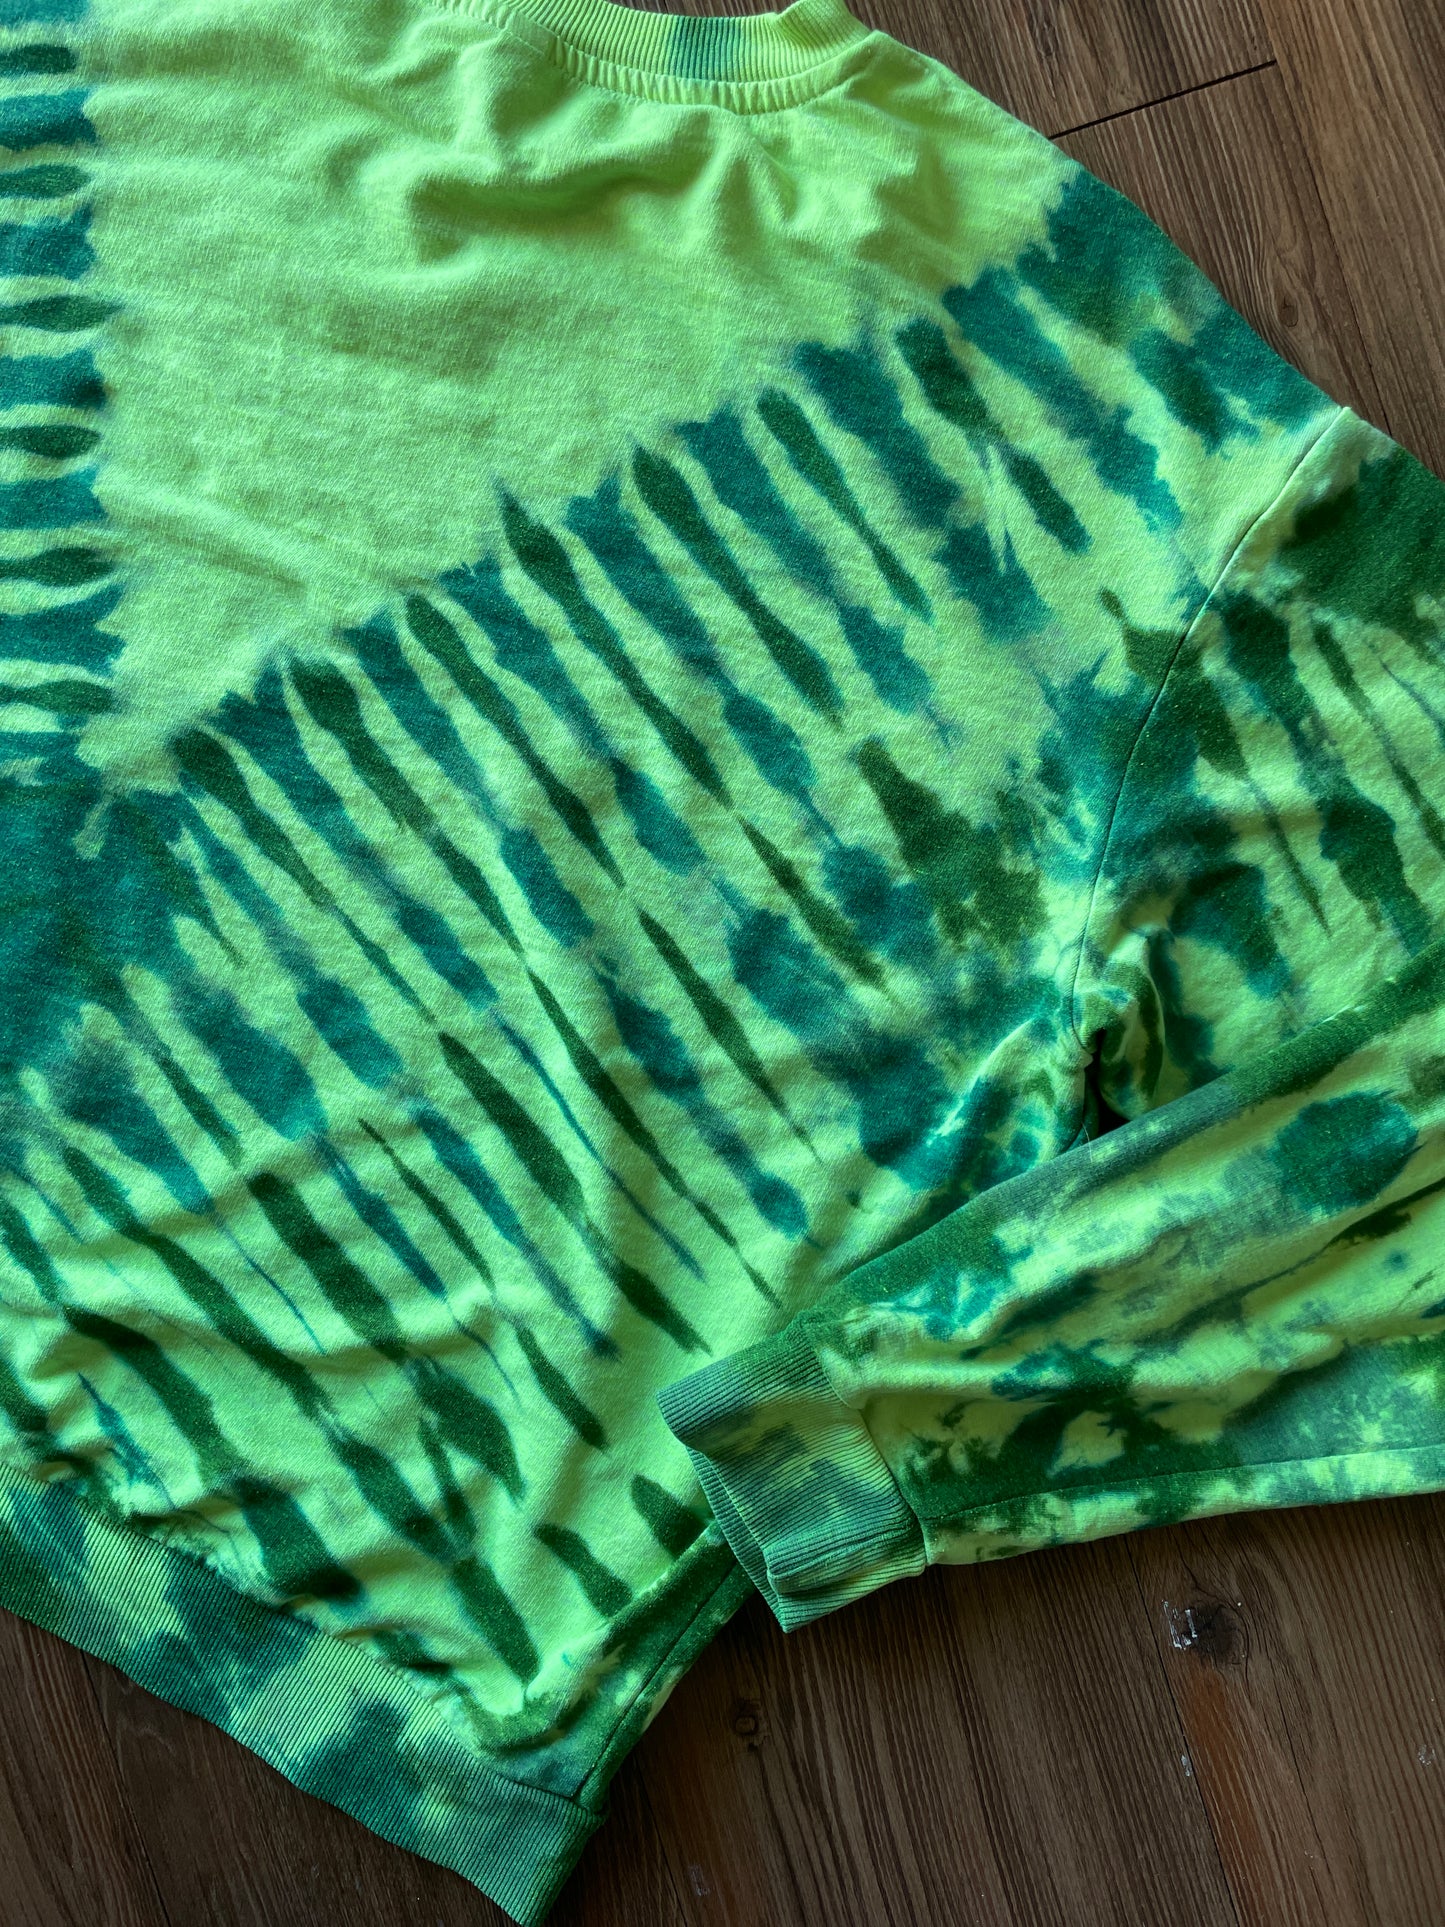 XL Women’s No Thanks Handmade Tie Dye Long Sleeve T-Shirt | One-Of-a-Kind Neon Green and Blue Long Sleeve